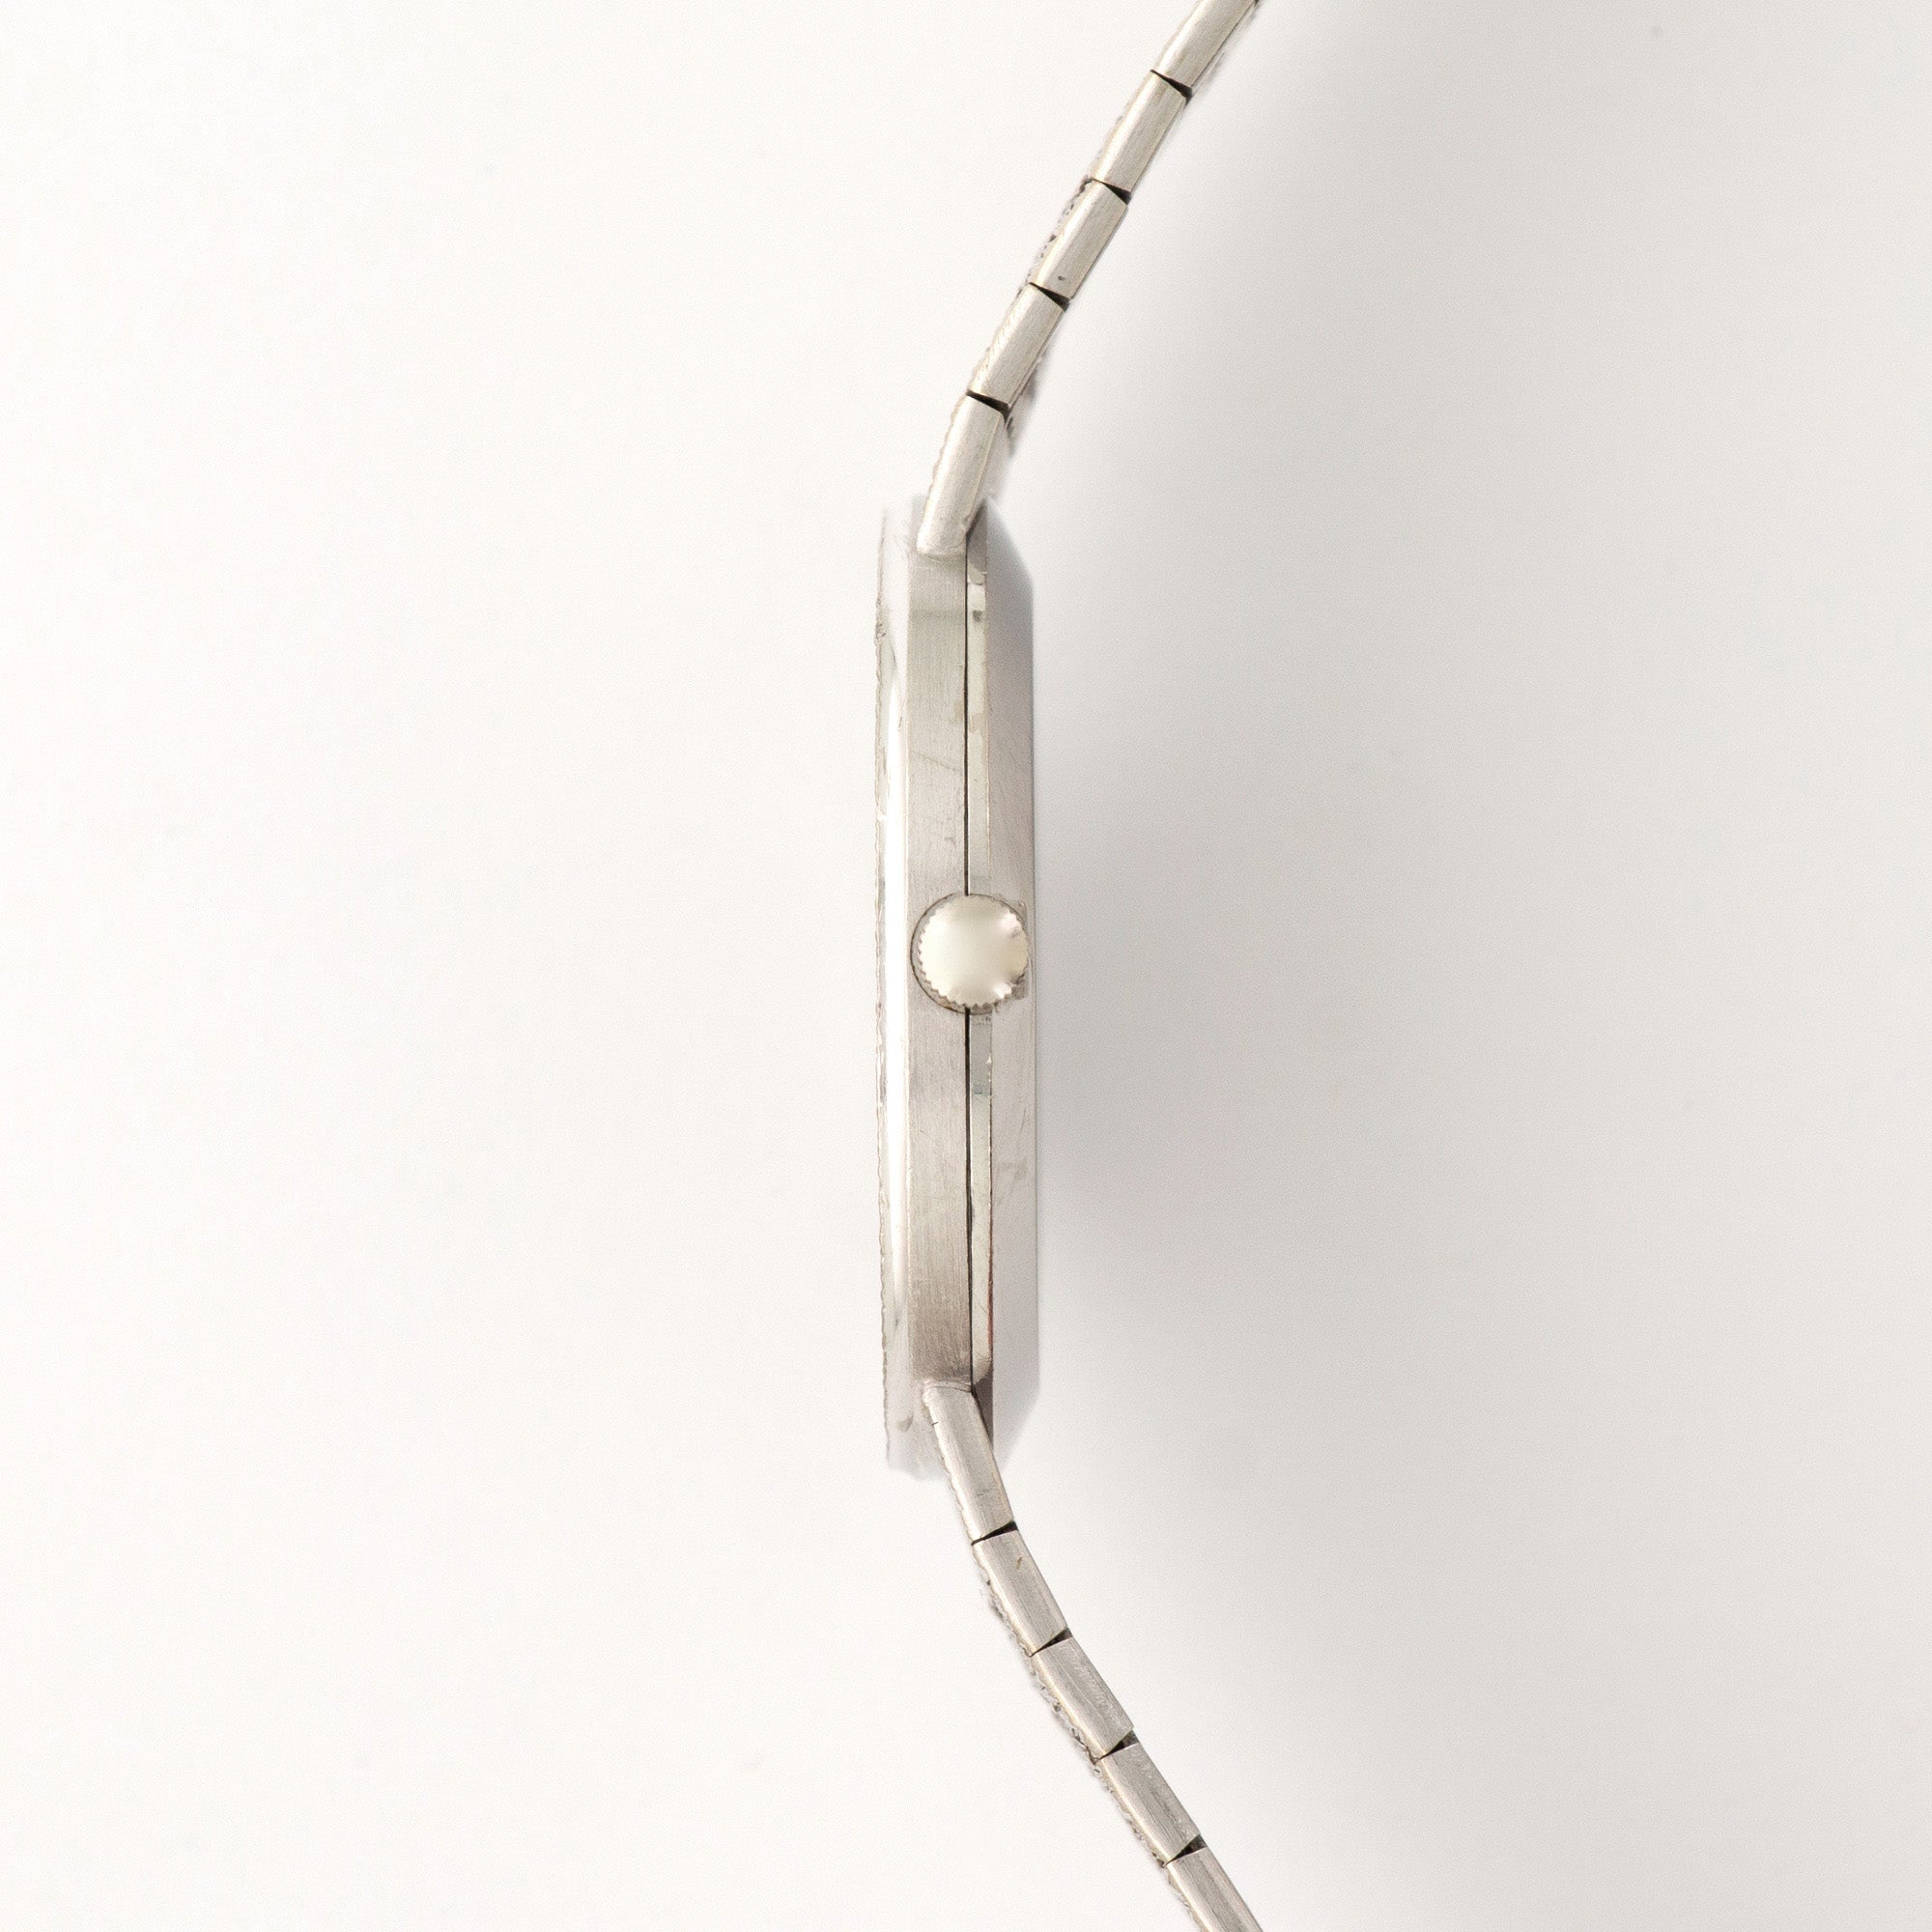 Piaget - Piaget White Gold Automatic Watch Ref. 12311, Retailed by Asprey - The Keystone Watches